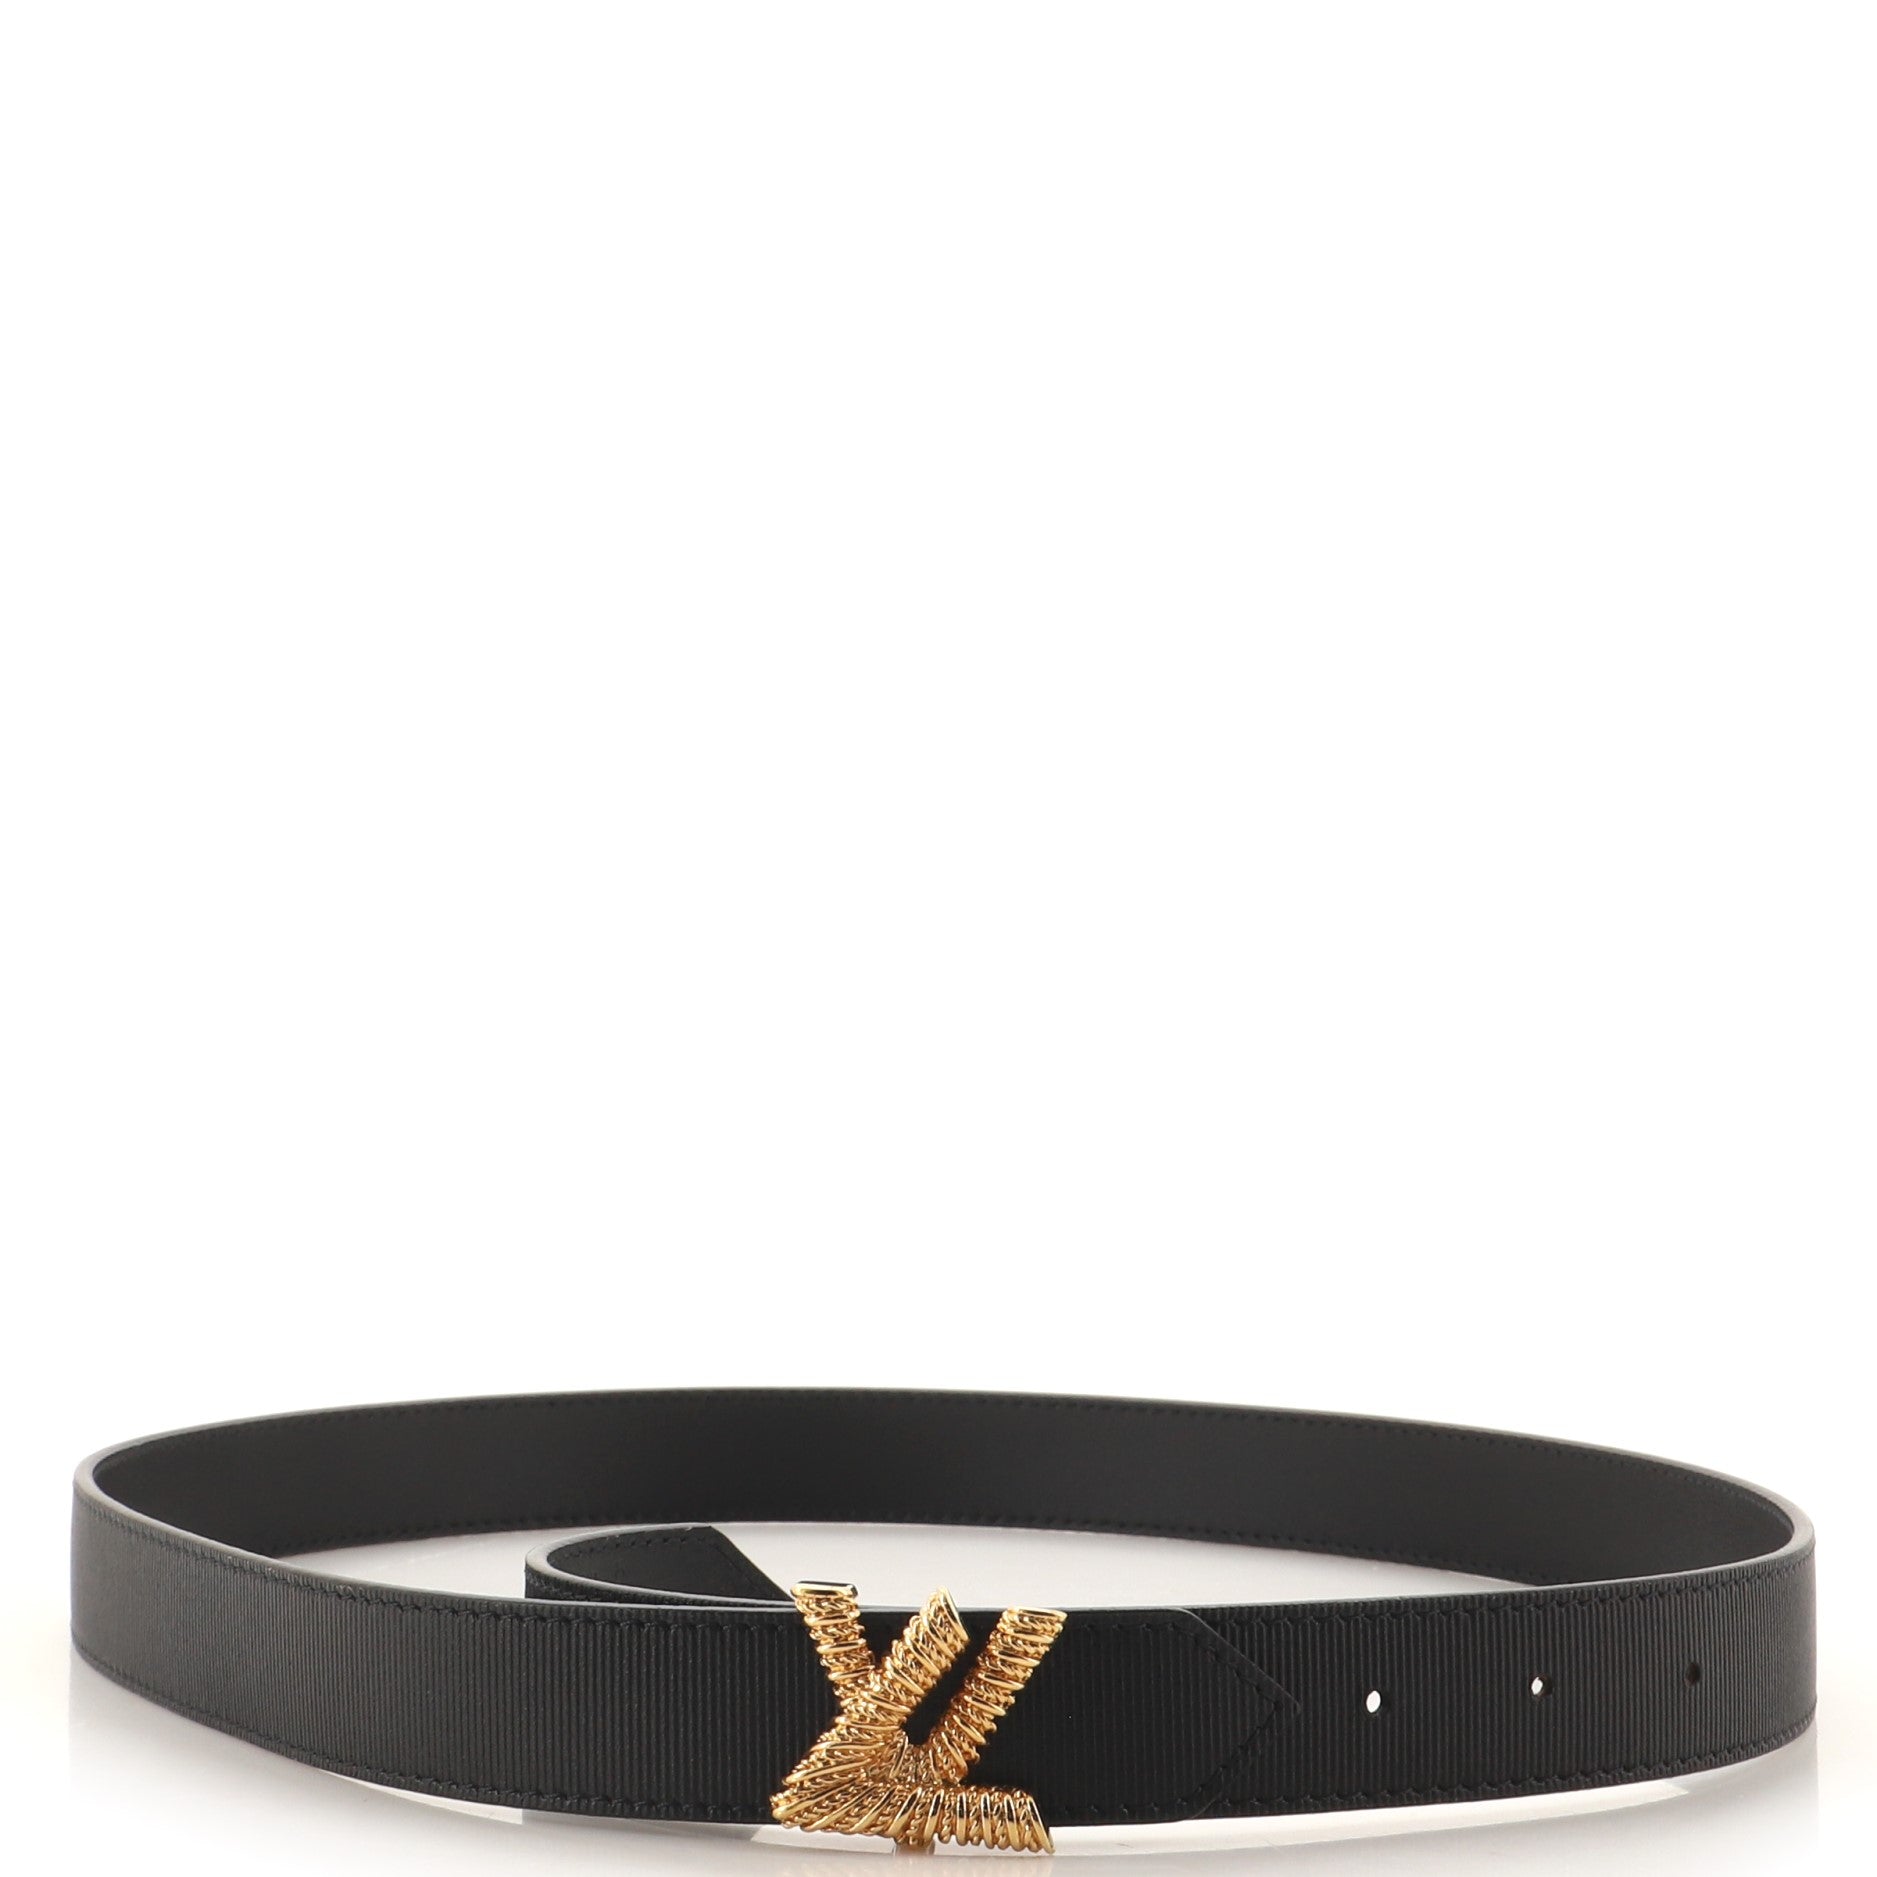 Products By Louis Vuitton: Lv Twist Ring 25mm Reversible Belt